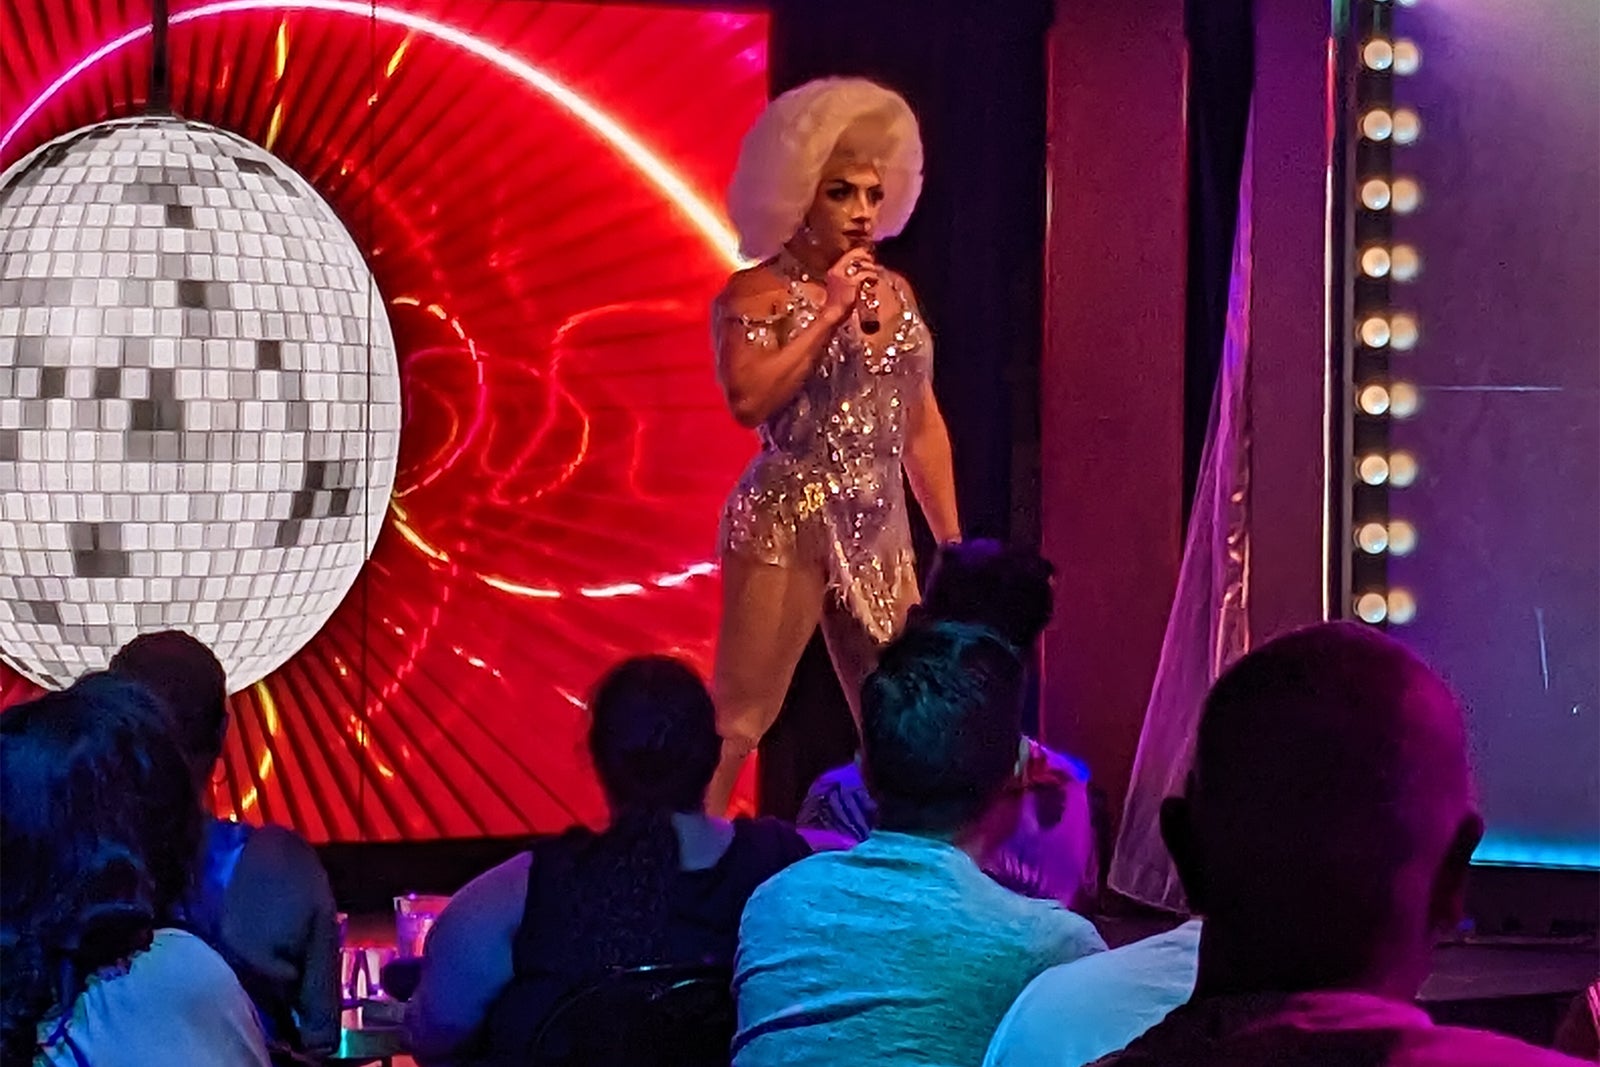 Blonde drag queen on stage in sparkly dress